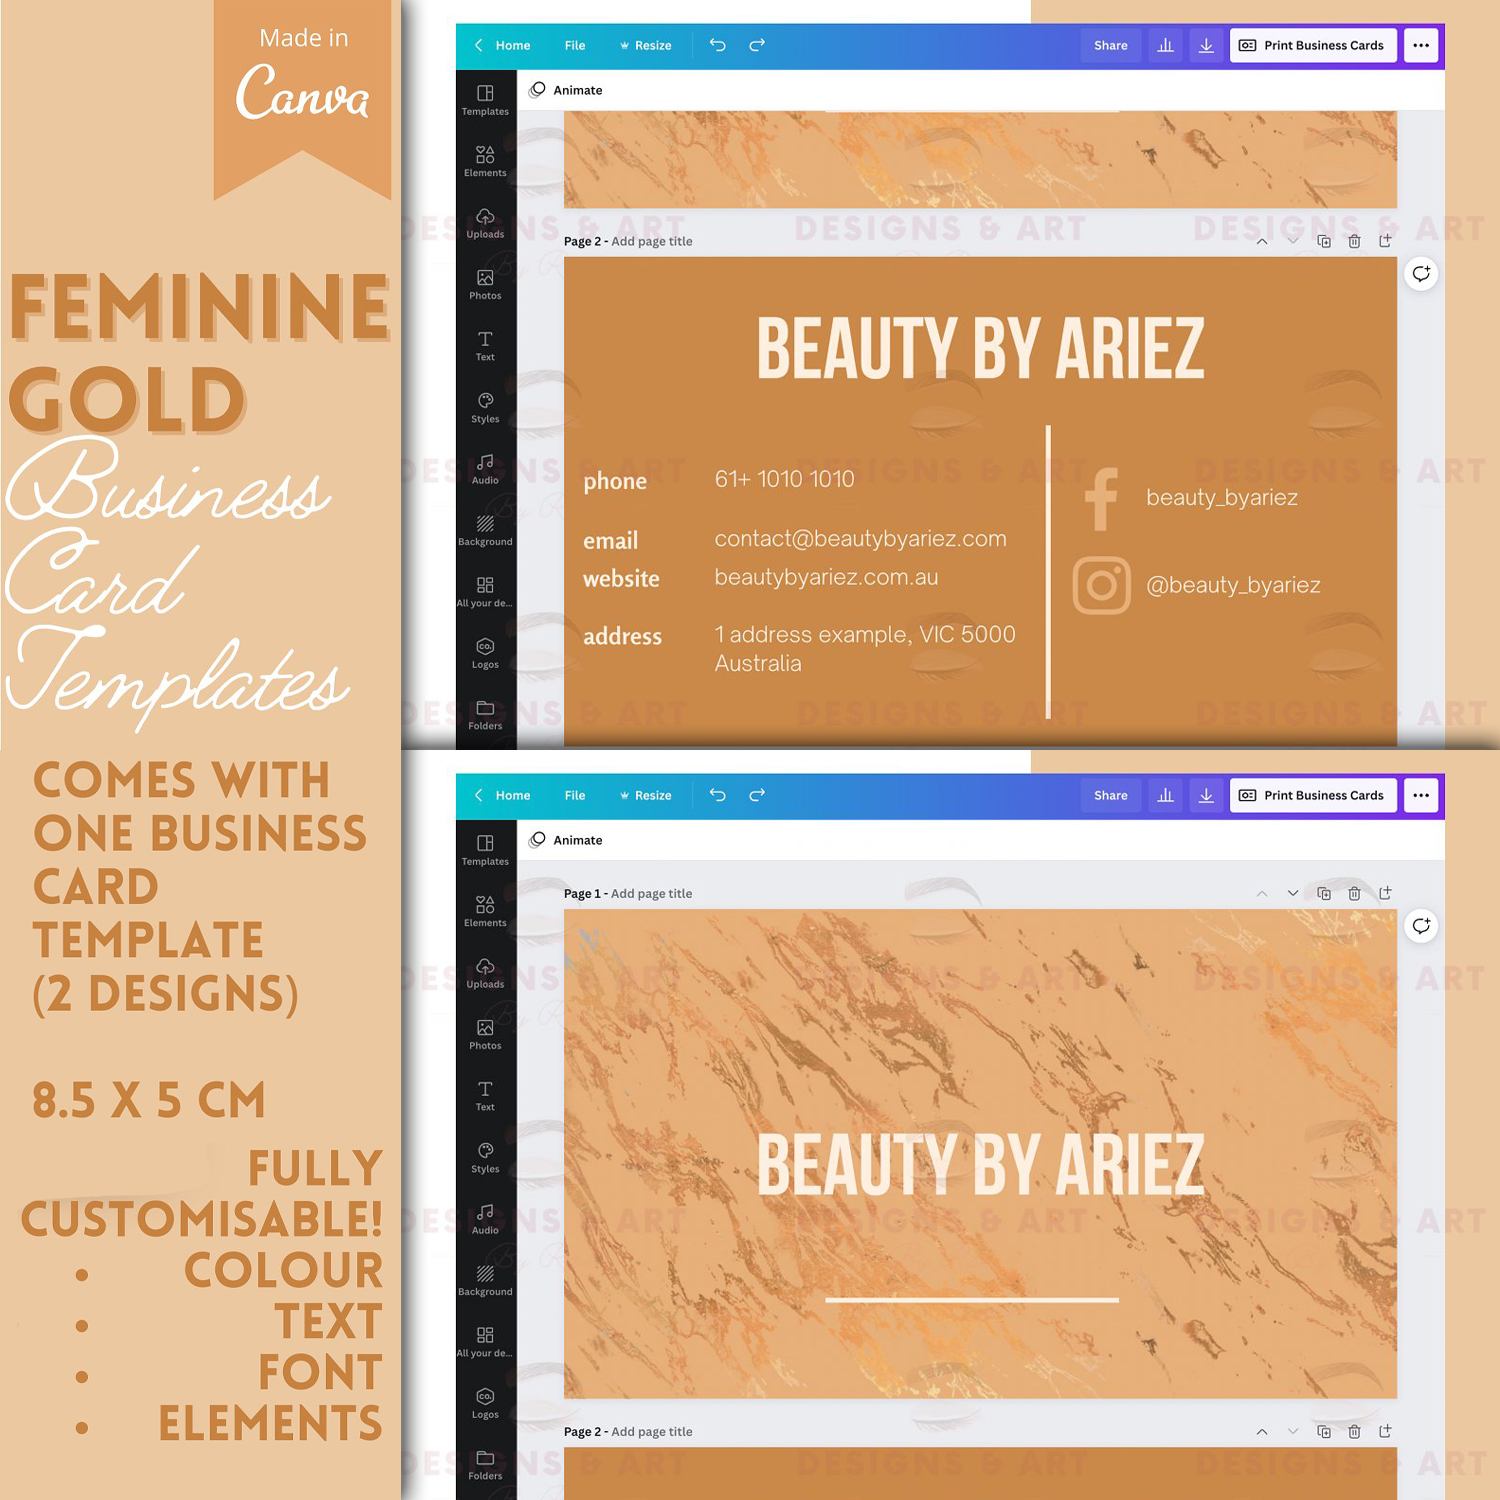 Preview gold business card templates.